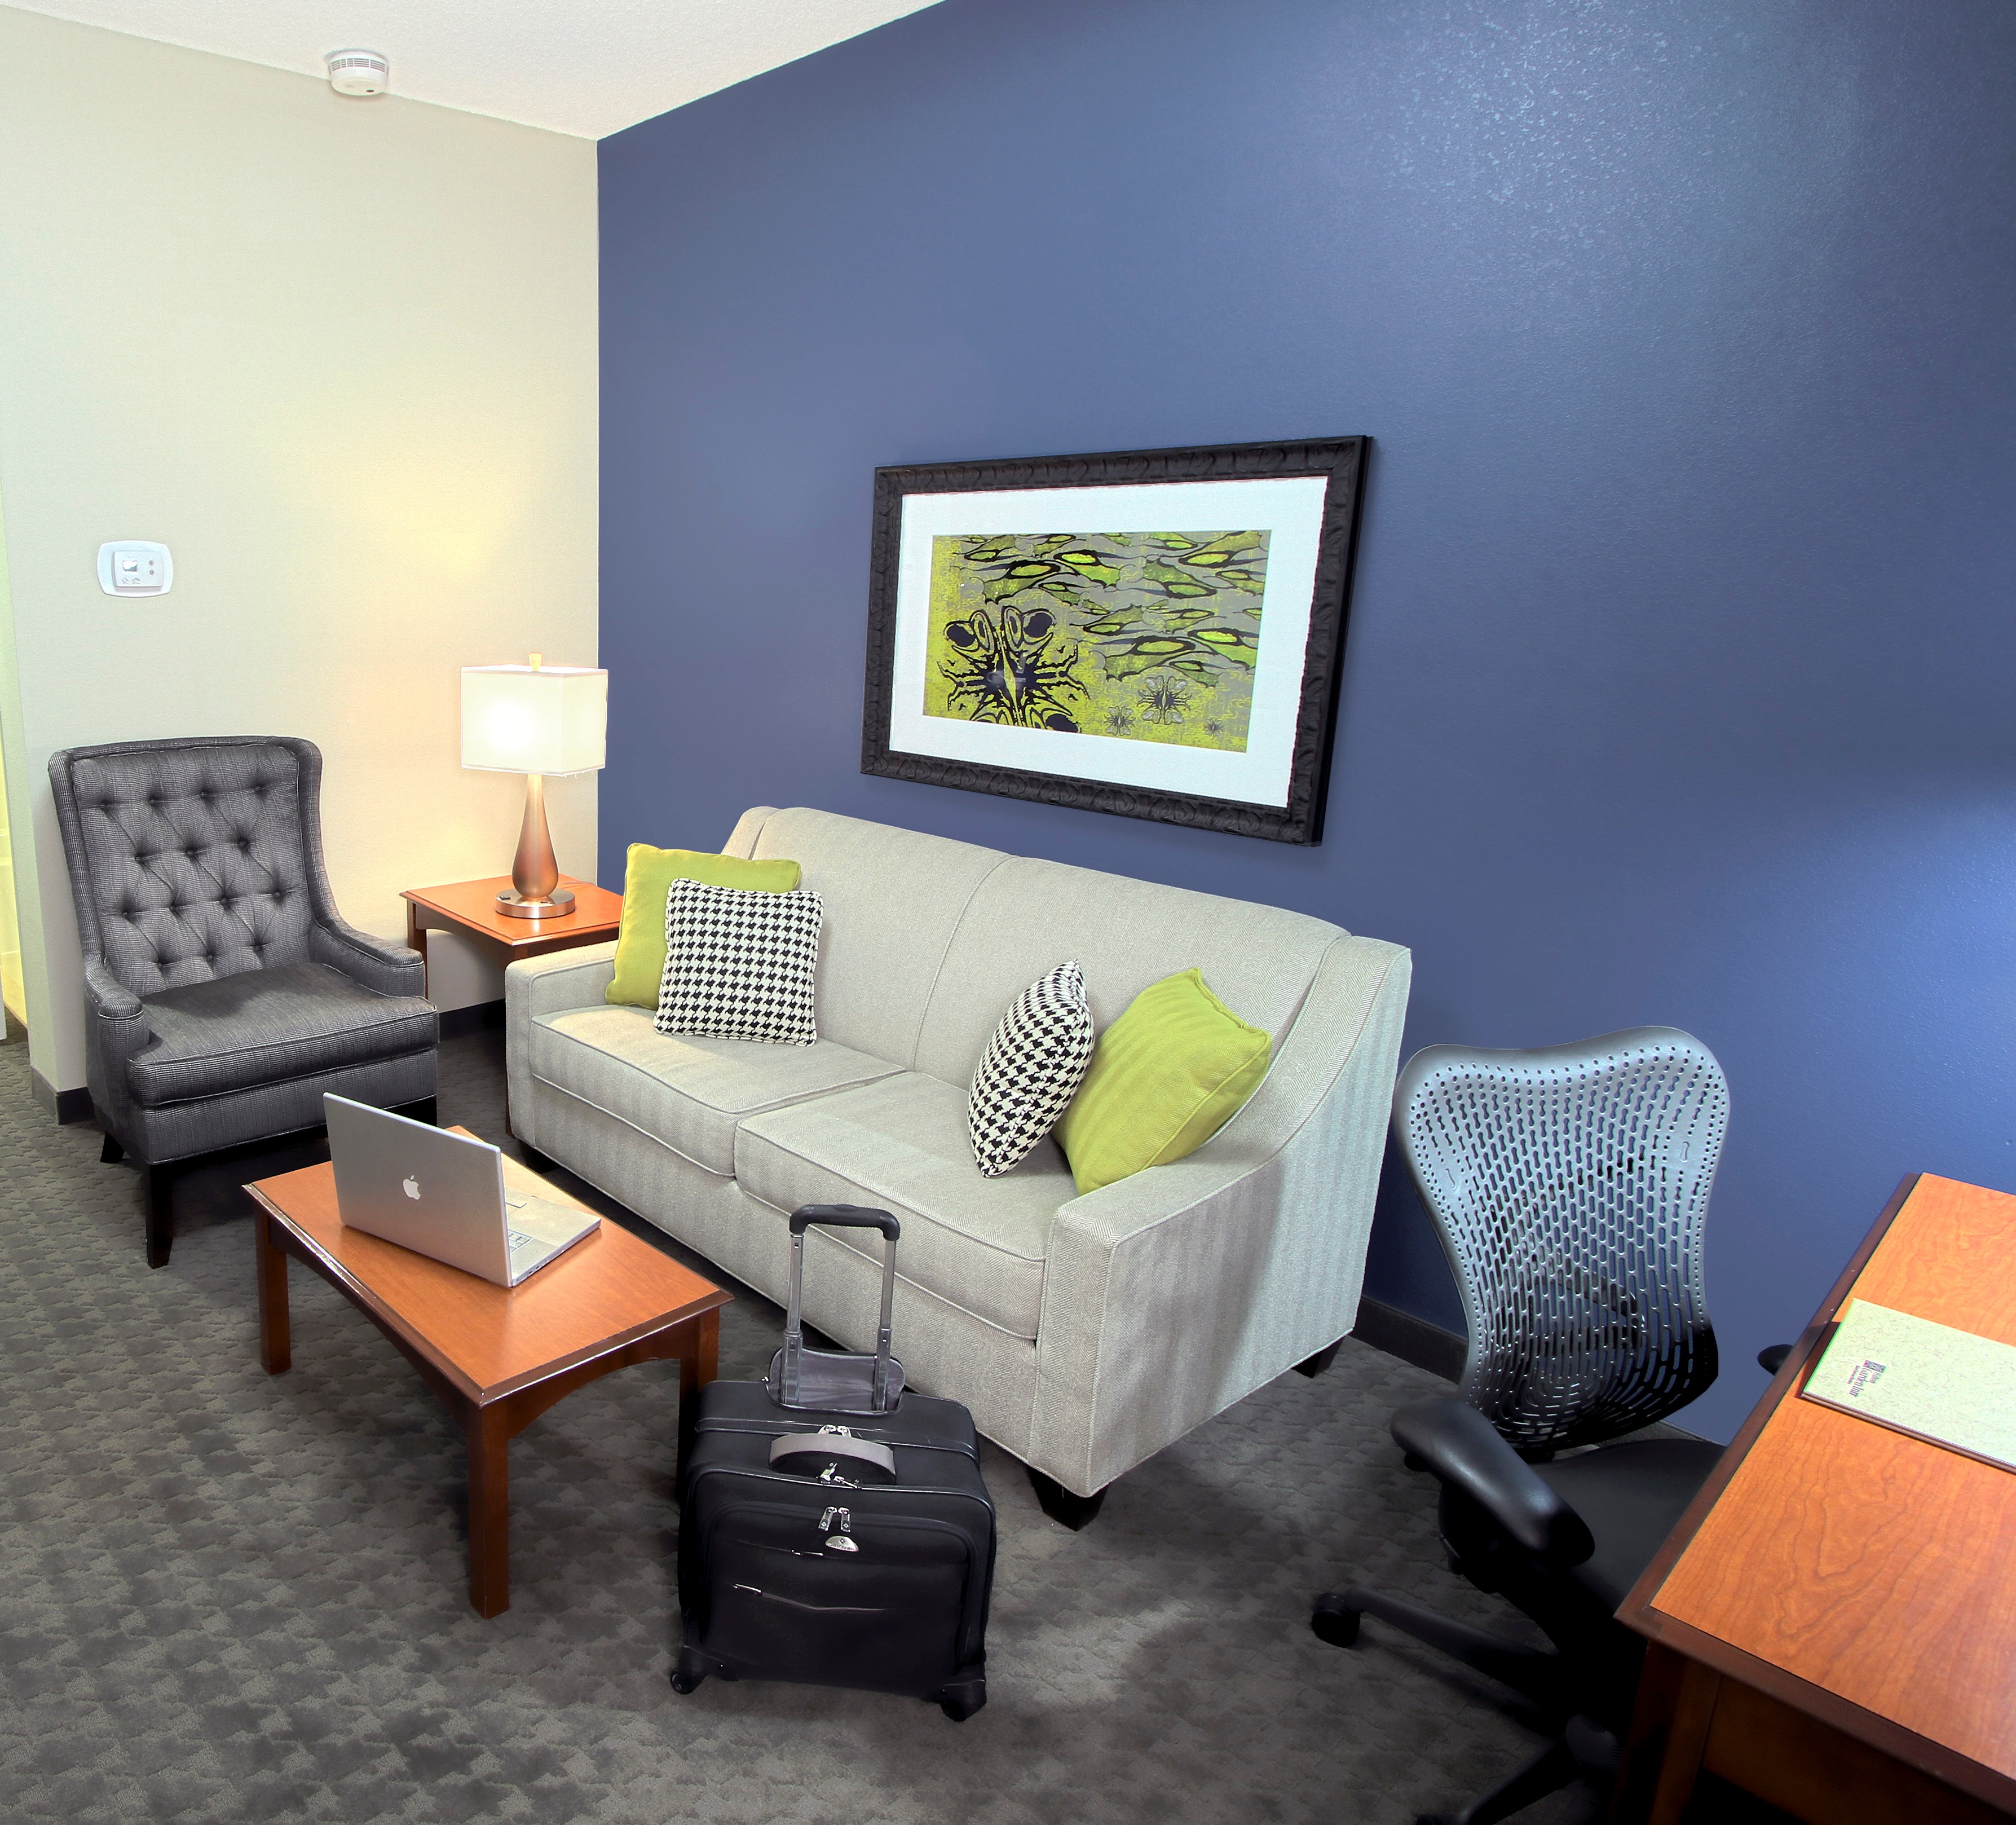 Suite Living Area With Wall Art, Table, Soft Seating, and Work Desk